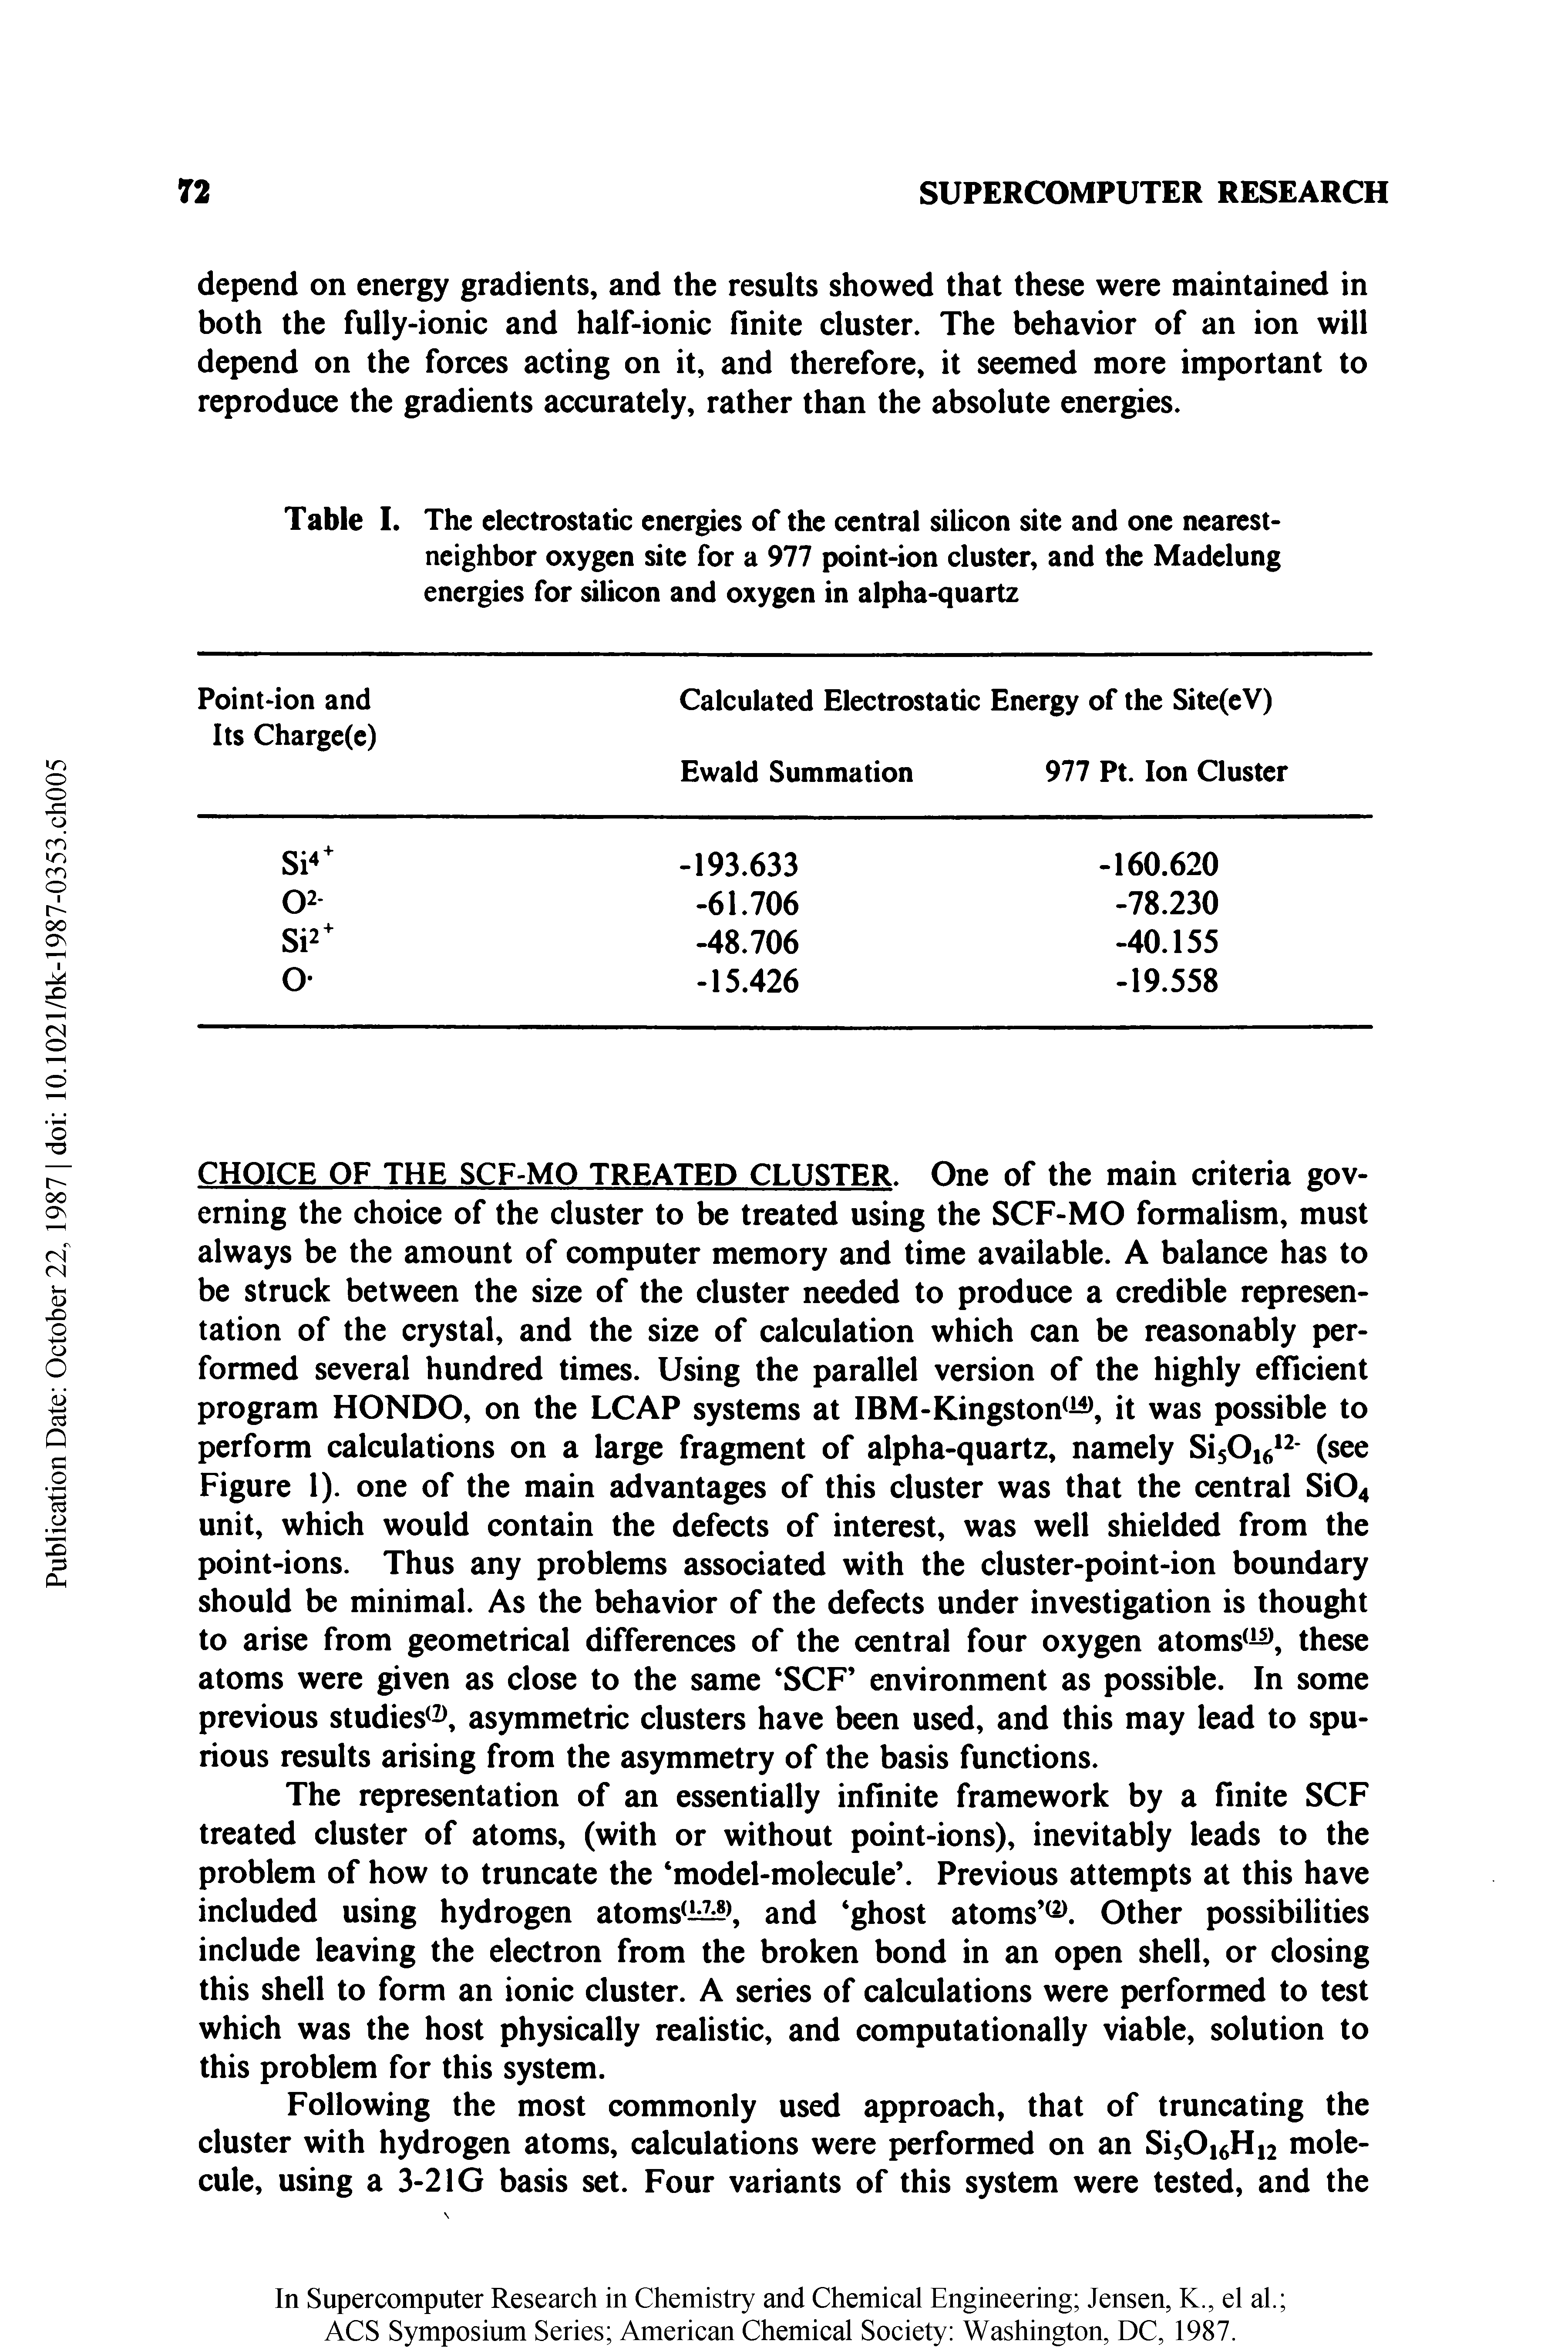 Table I. The electrostatic energies of the central silicon site and one nearest-neighbor oxygen site for a 977 point-ion cluster, and the Madelung energies for silicon and oxygen in alpha-quartz...